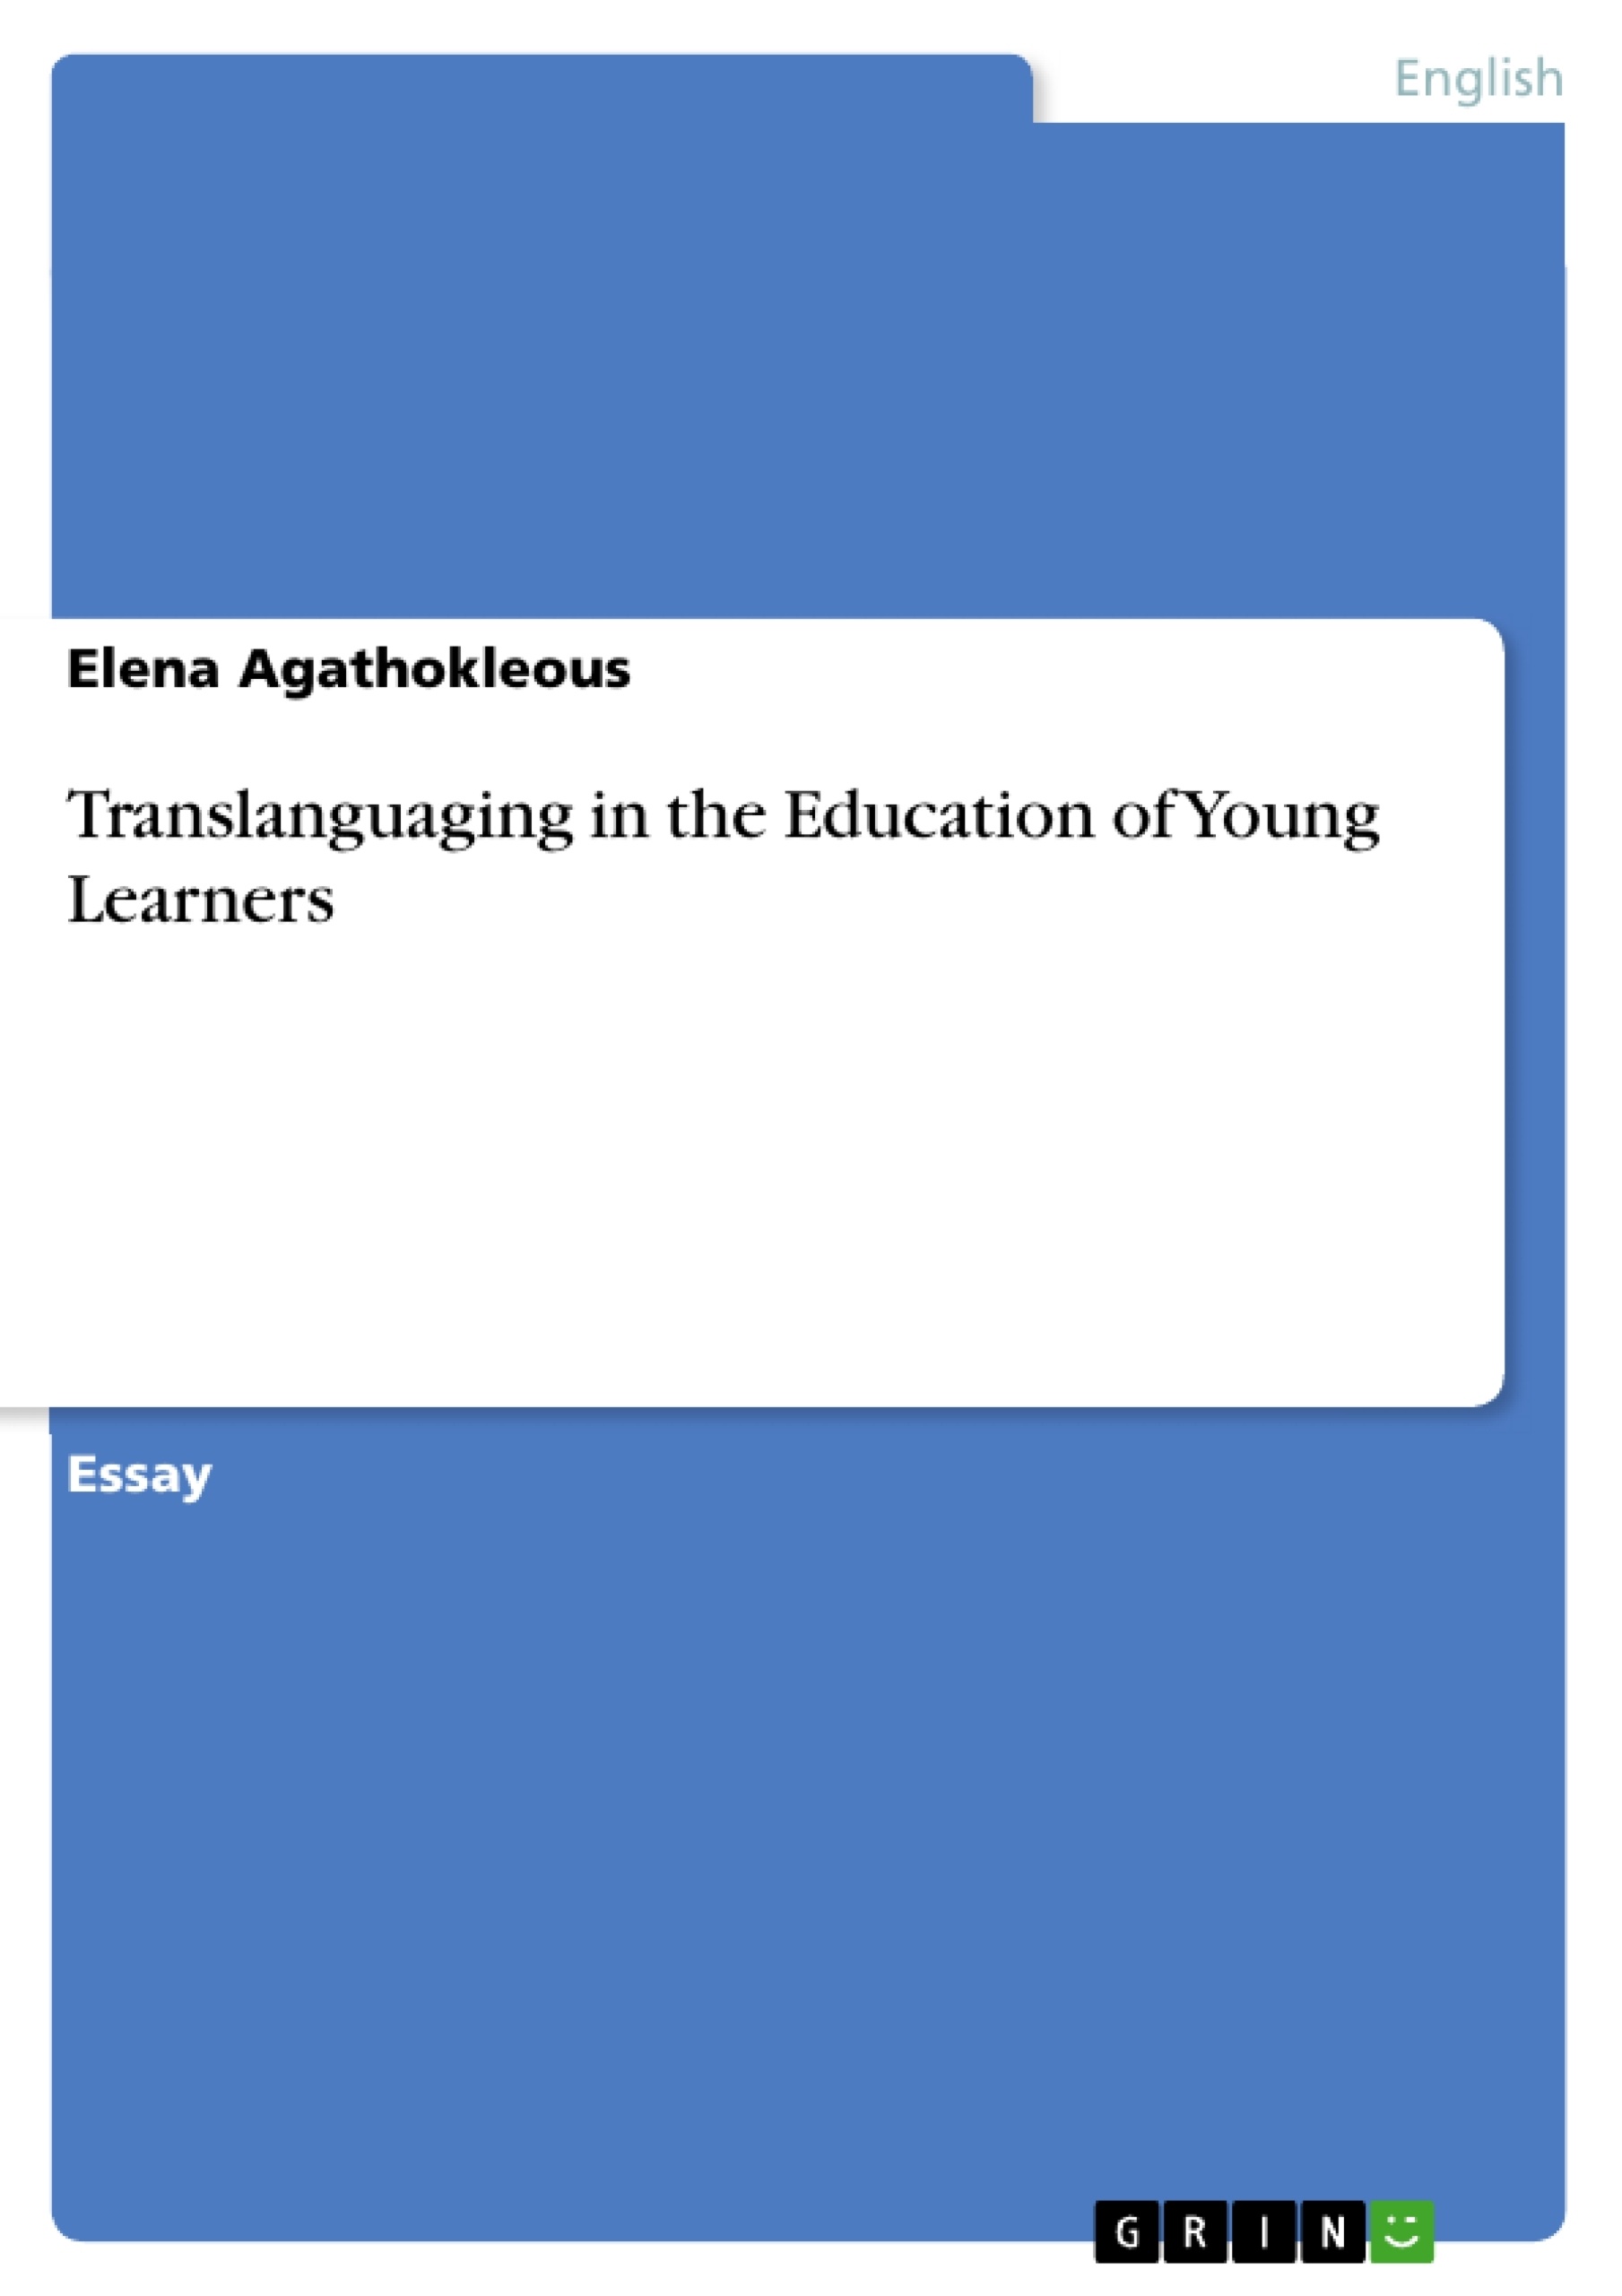 Title: Translanguaging in the Education of Young Learners